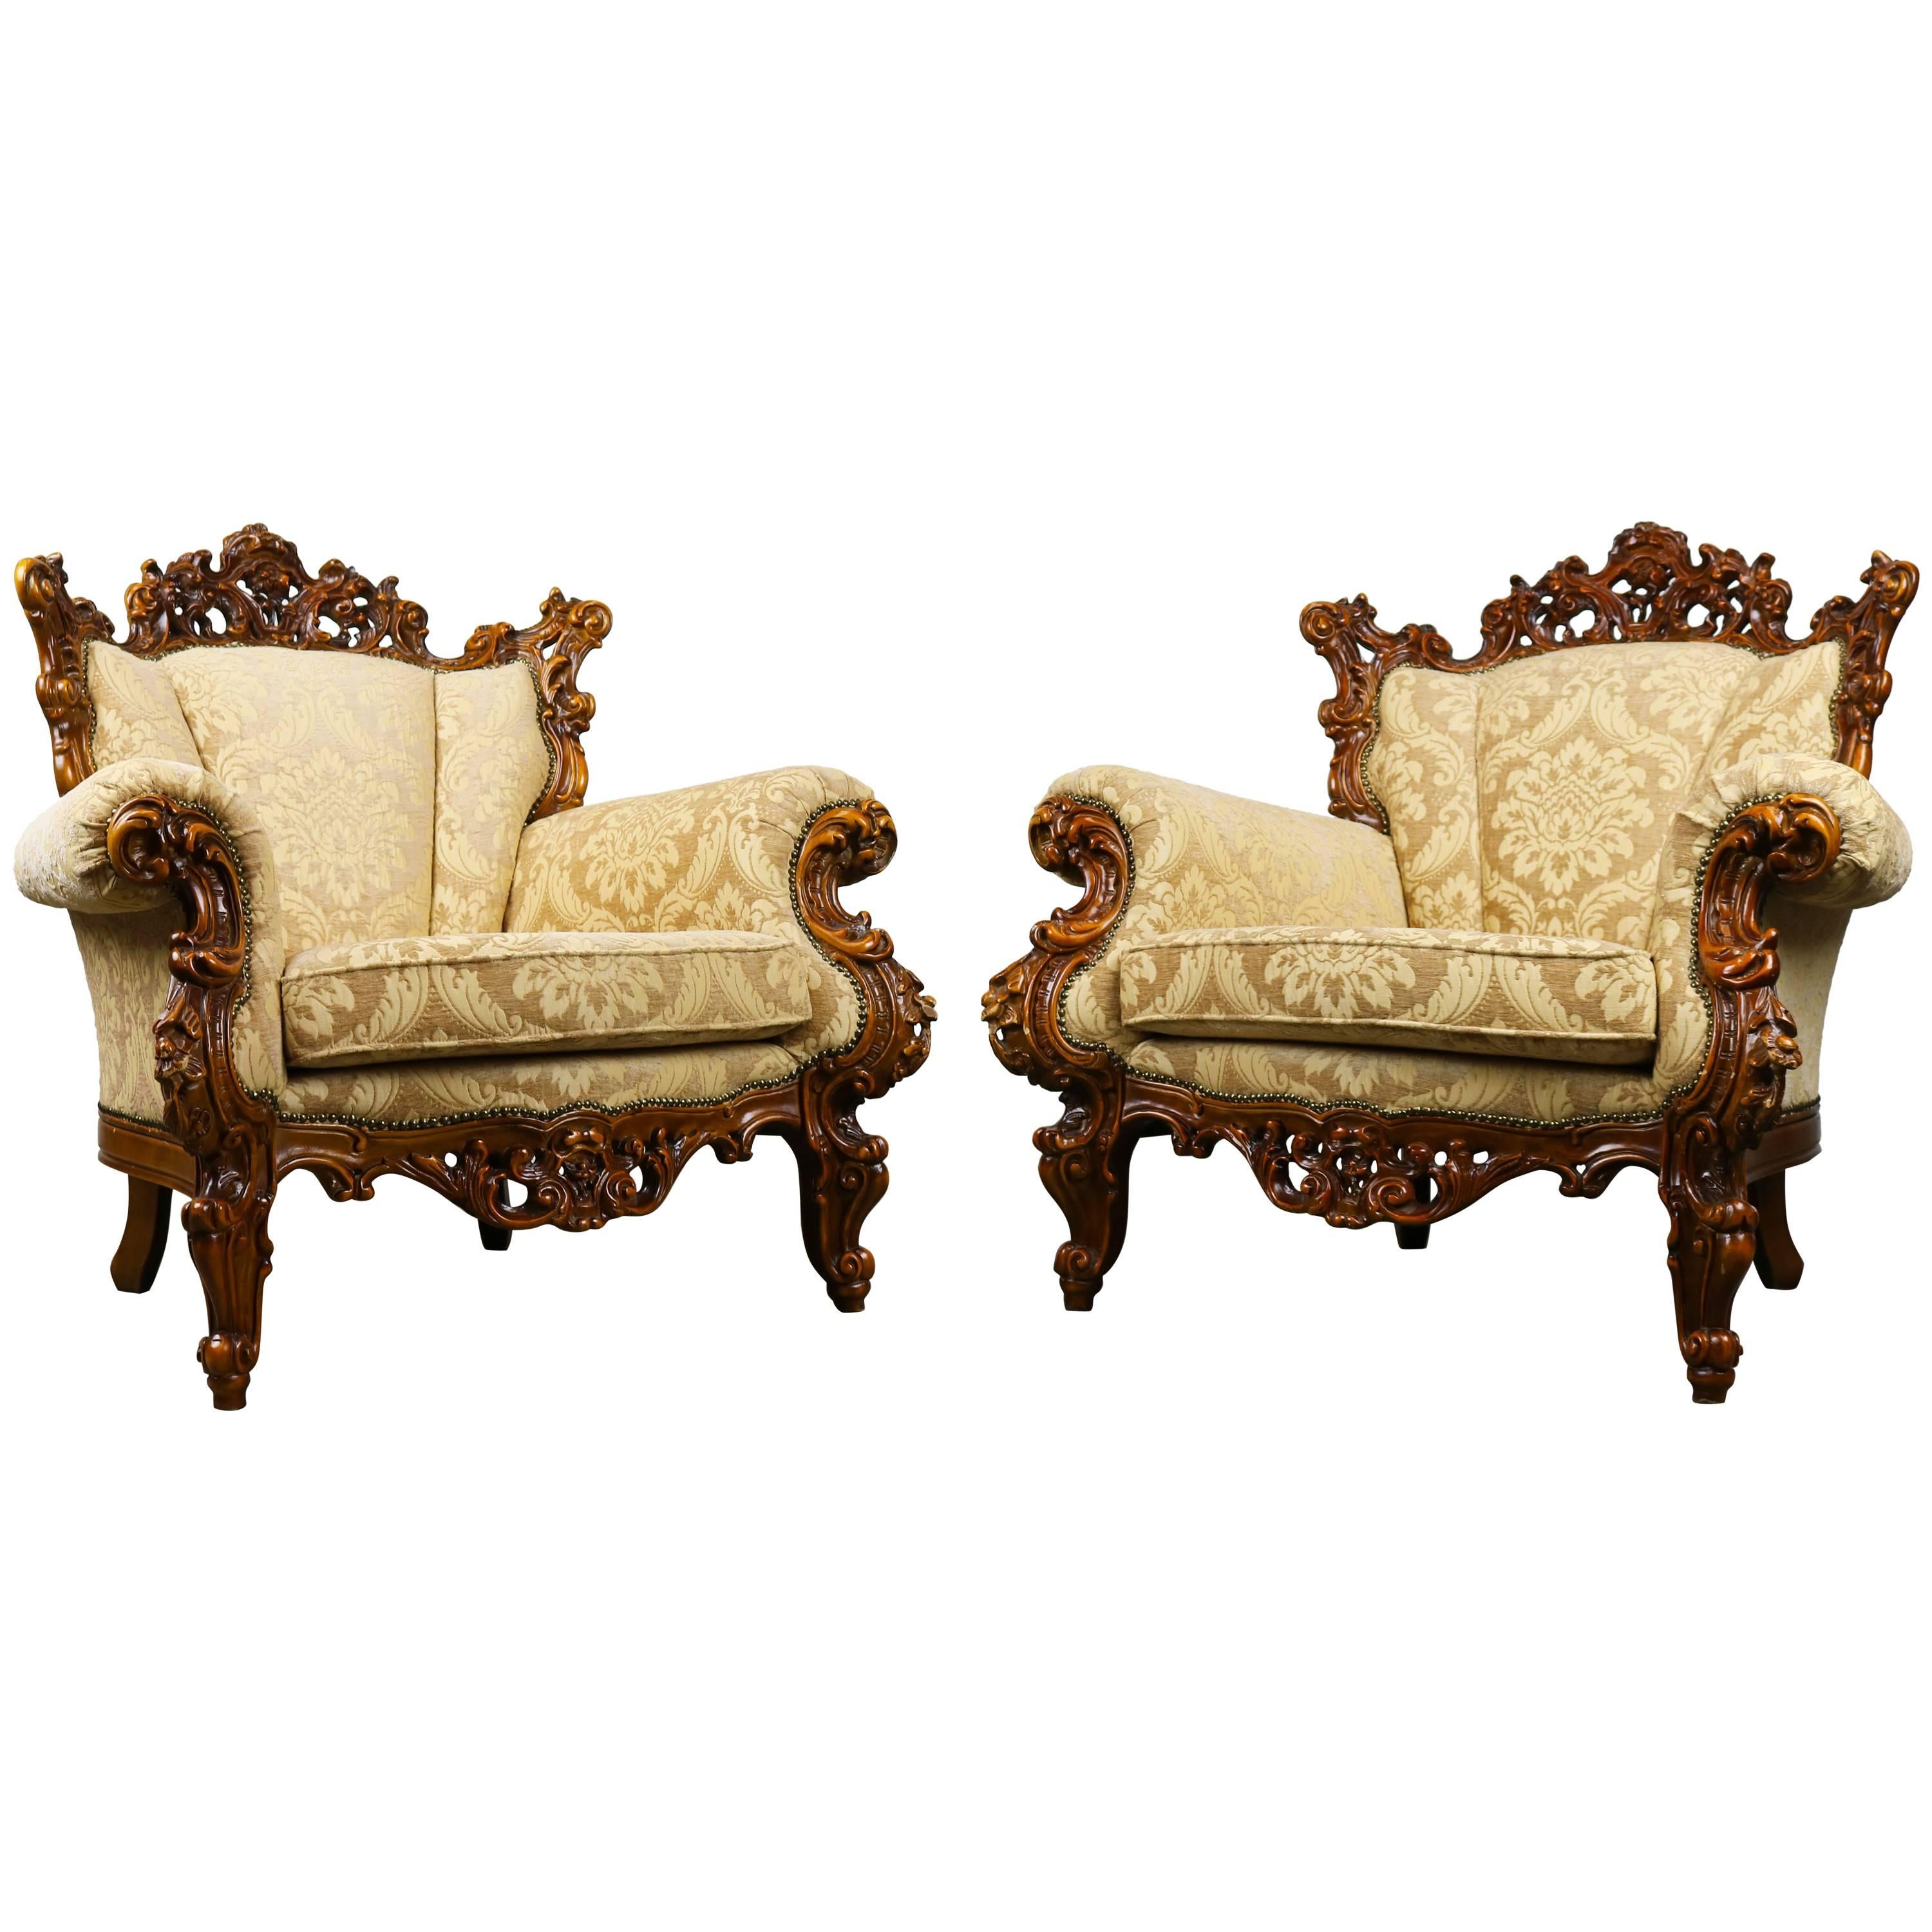 Luxurious Antique Italian Lounge Chairs in Rococo / Baroque Style Brown Beige For Sale